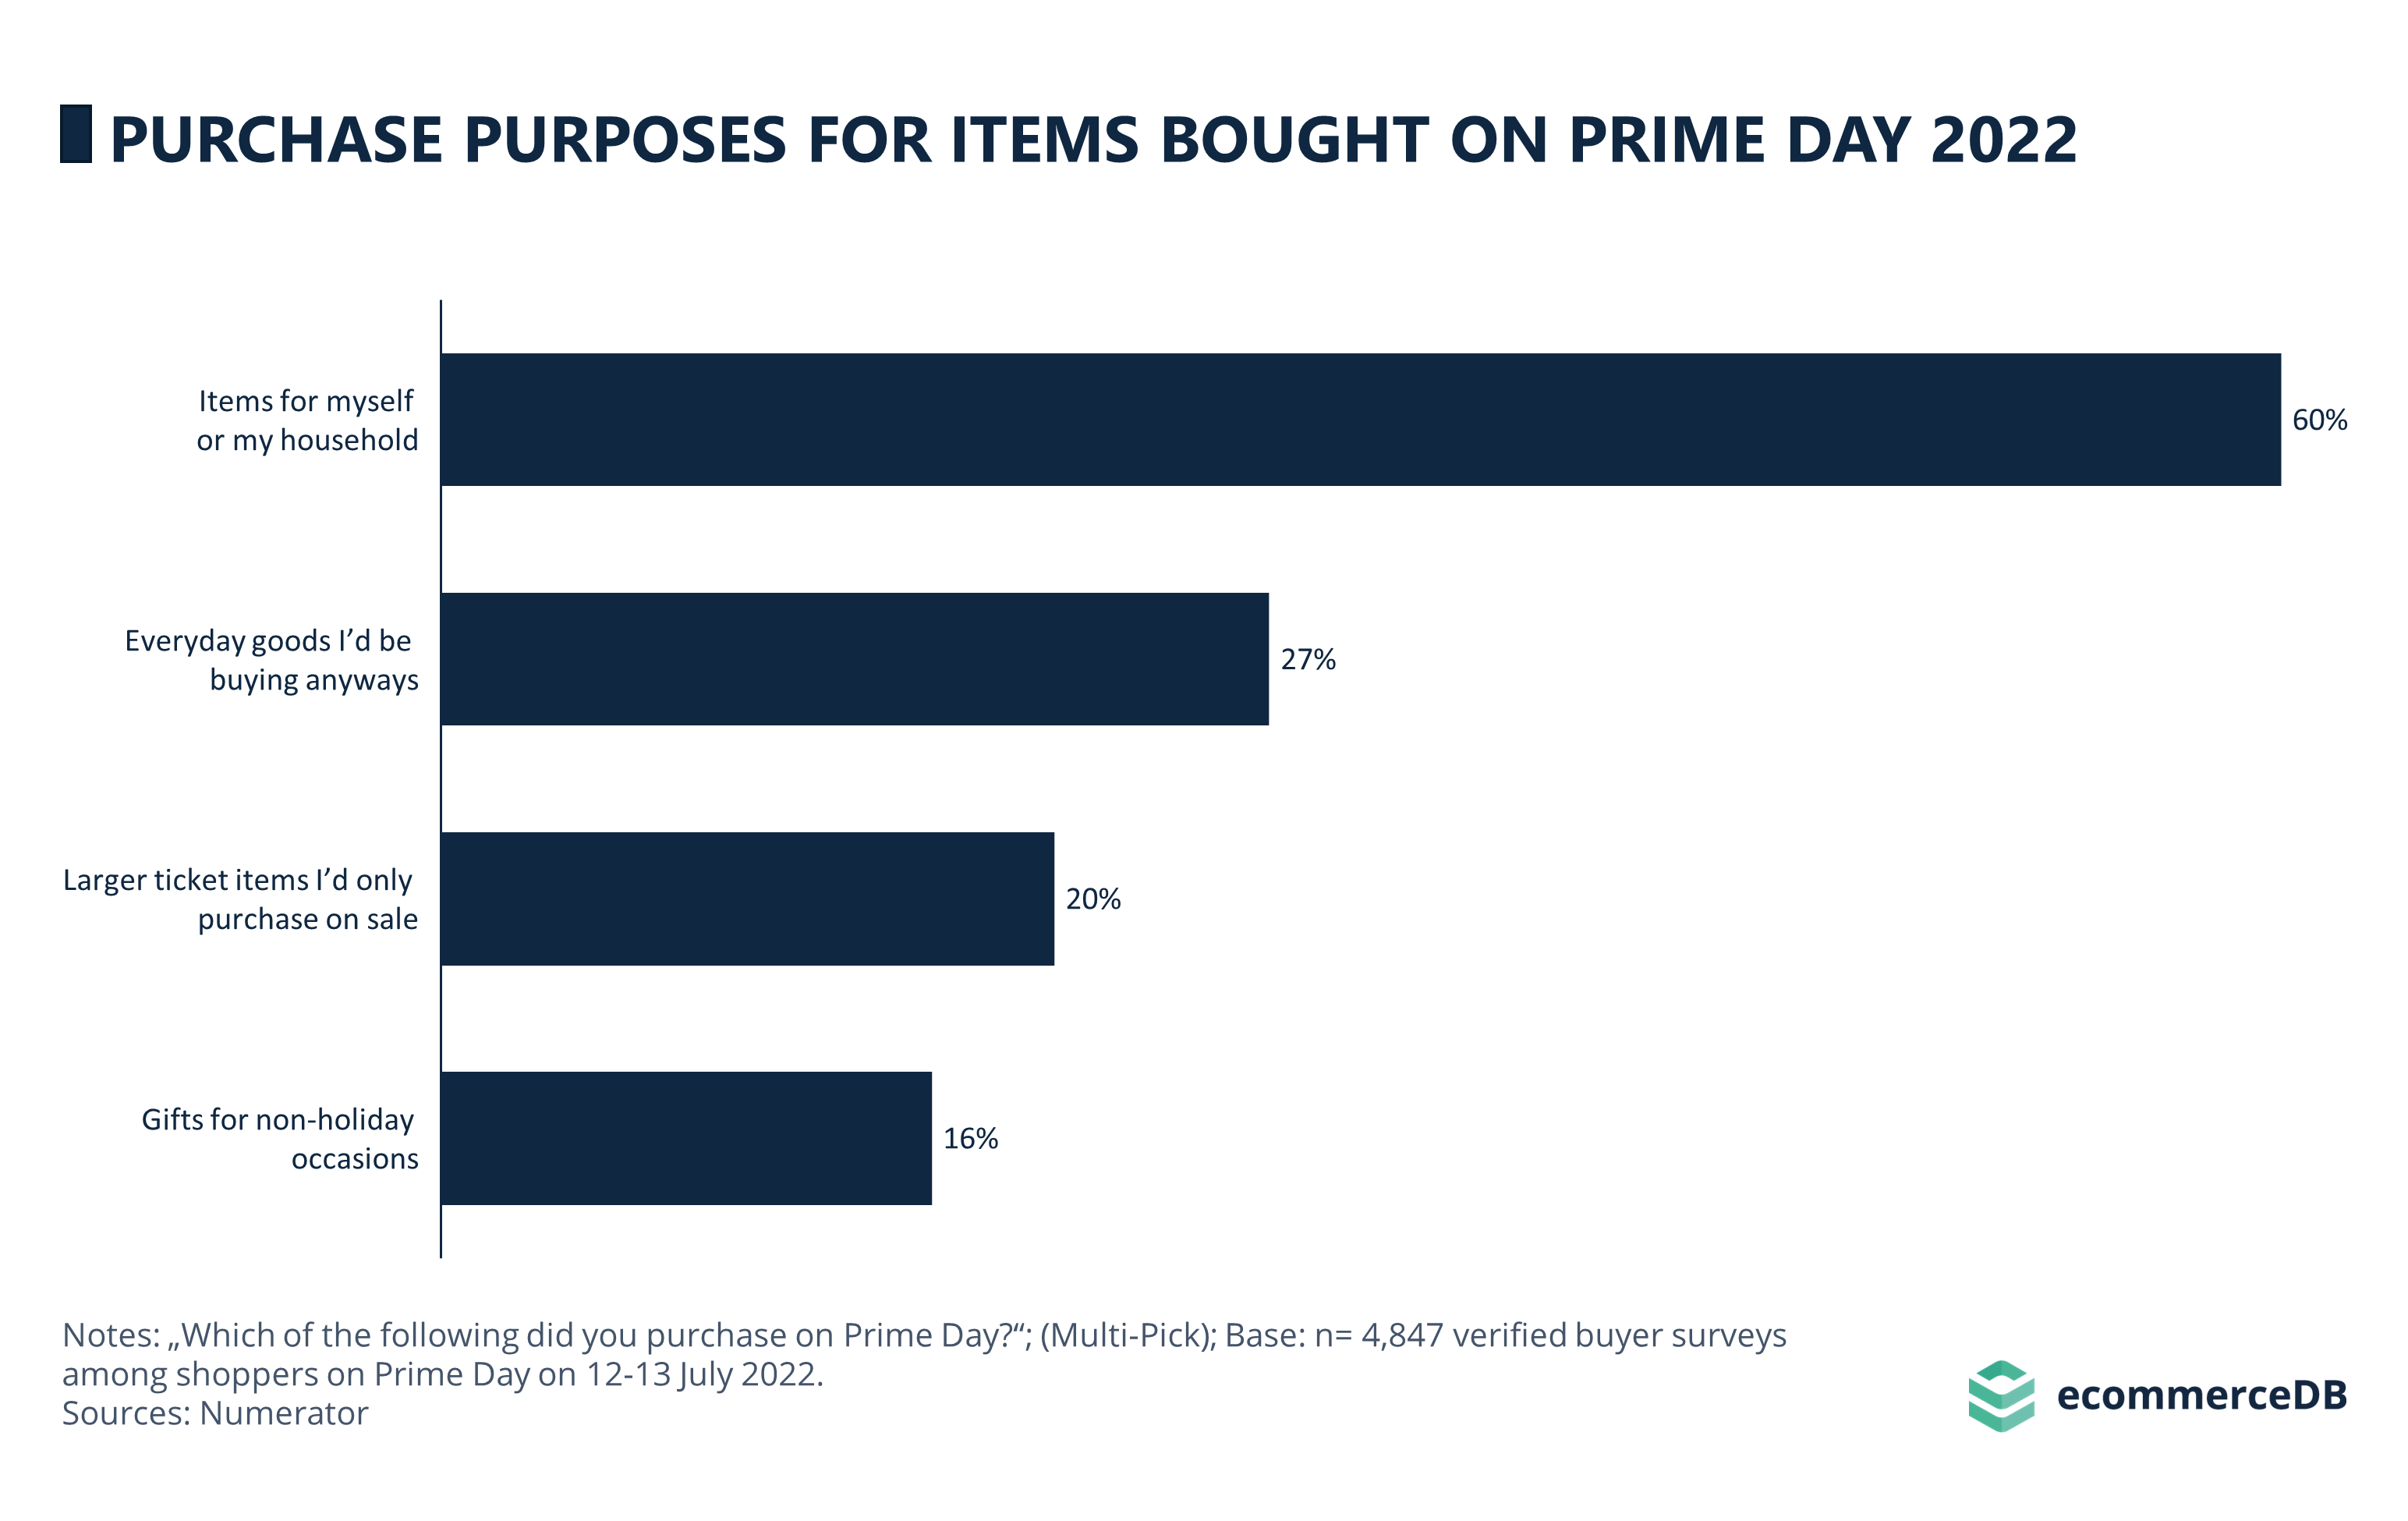 sold more than 100,000 items per minute during Prime Day 2022